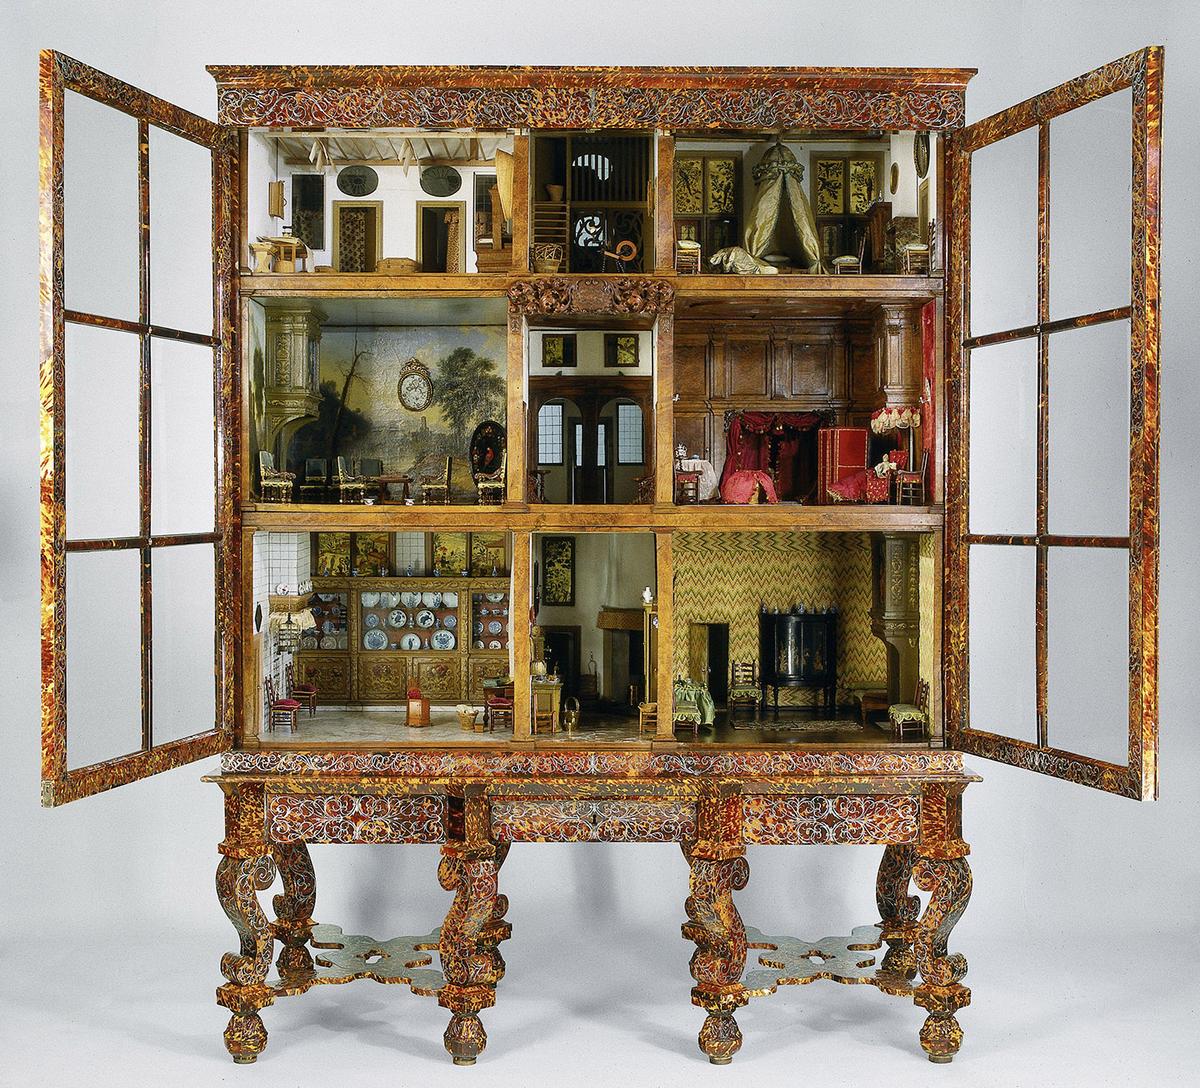  "Dolls’ House of Petronella Oortman," circa 1686–1710. Wood, tin, glass, marble, copper, stone, silk, and velvet; 100.3 inches by 74.8 inches by 30.7 inches. Rijksmuseum, Amsterdam. (Public Domain)